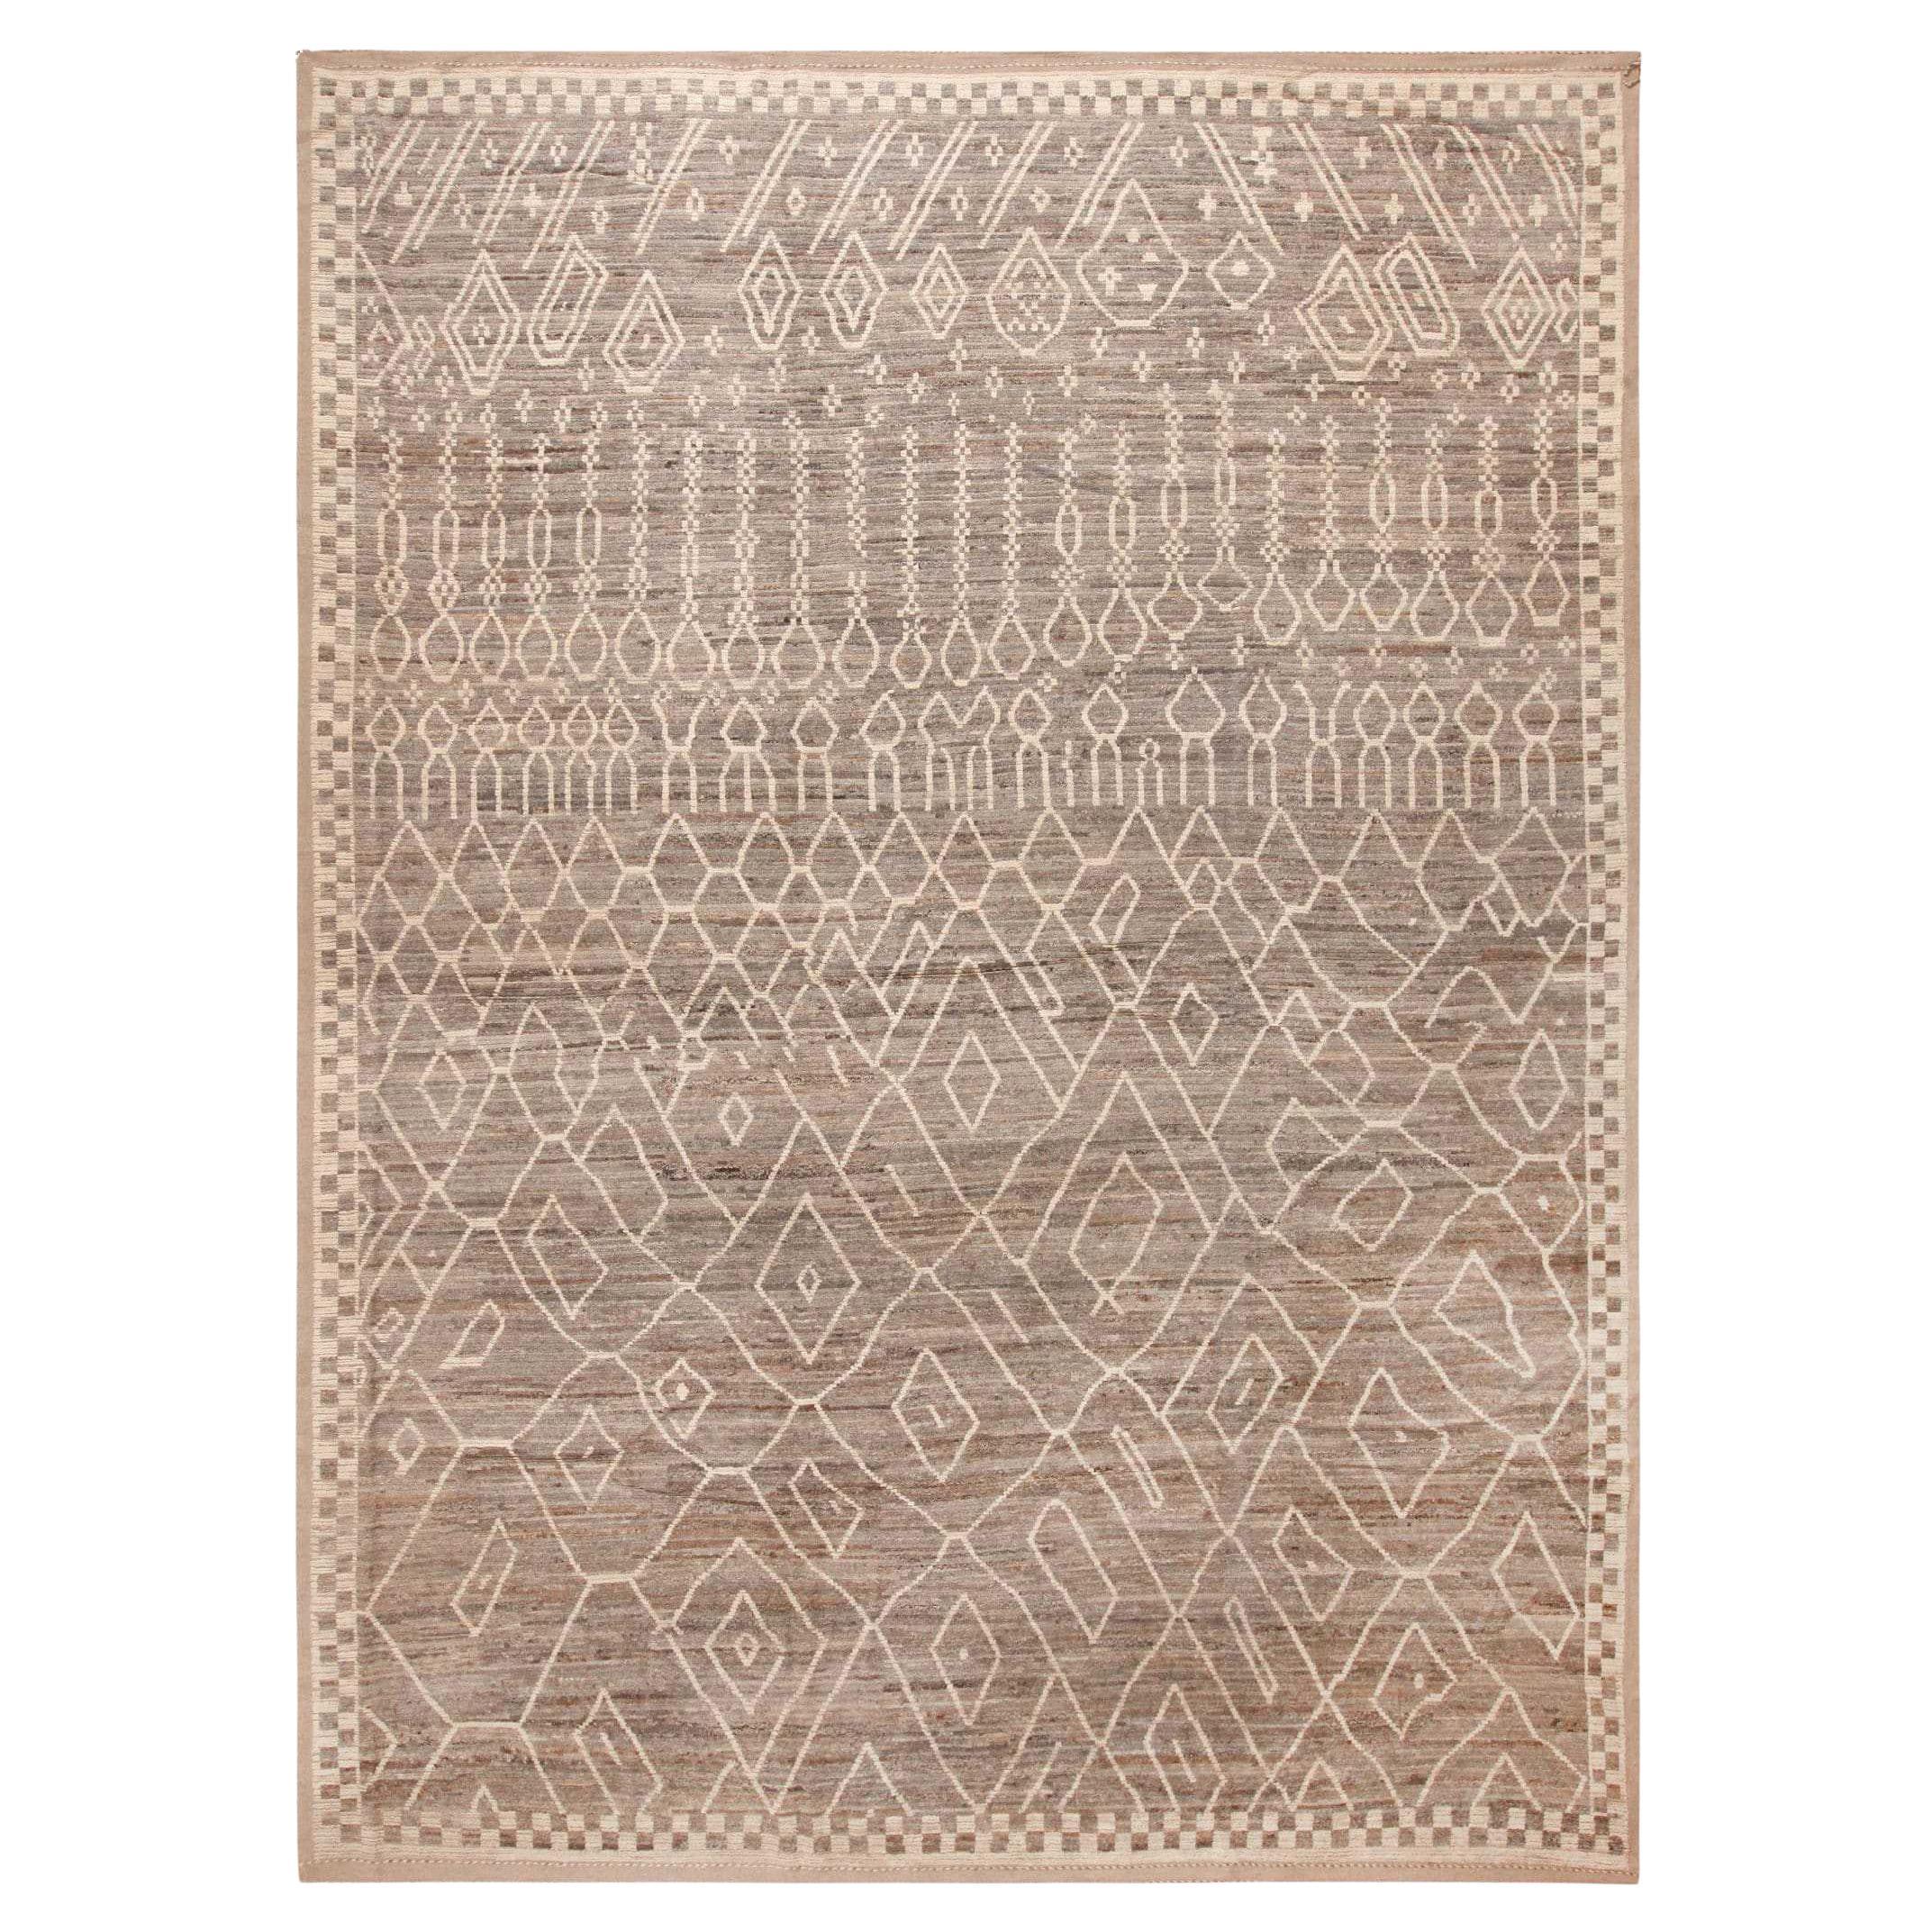 What is a tribal rug?